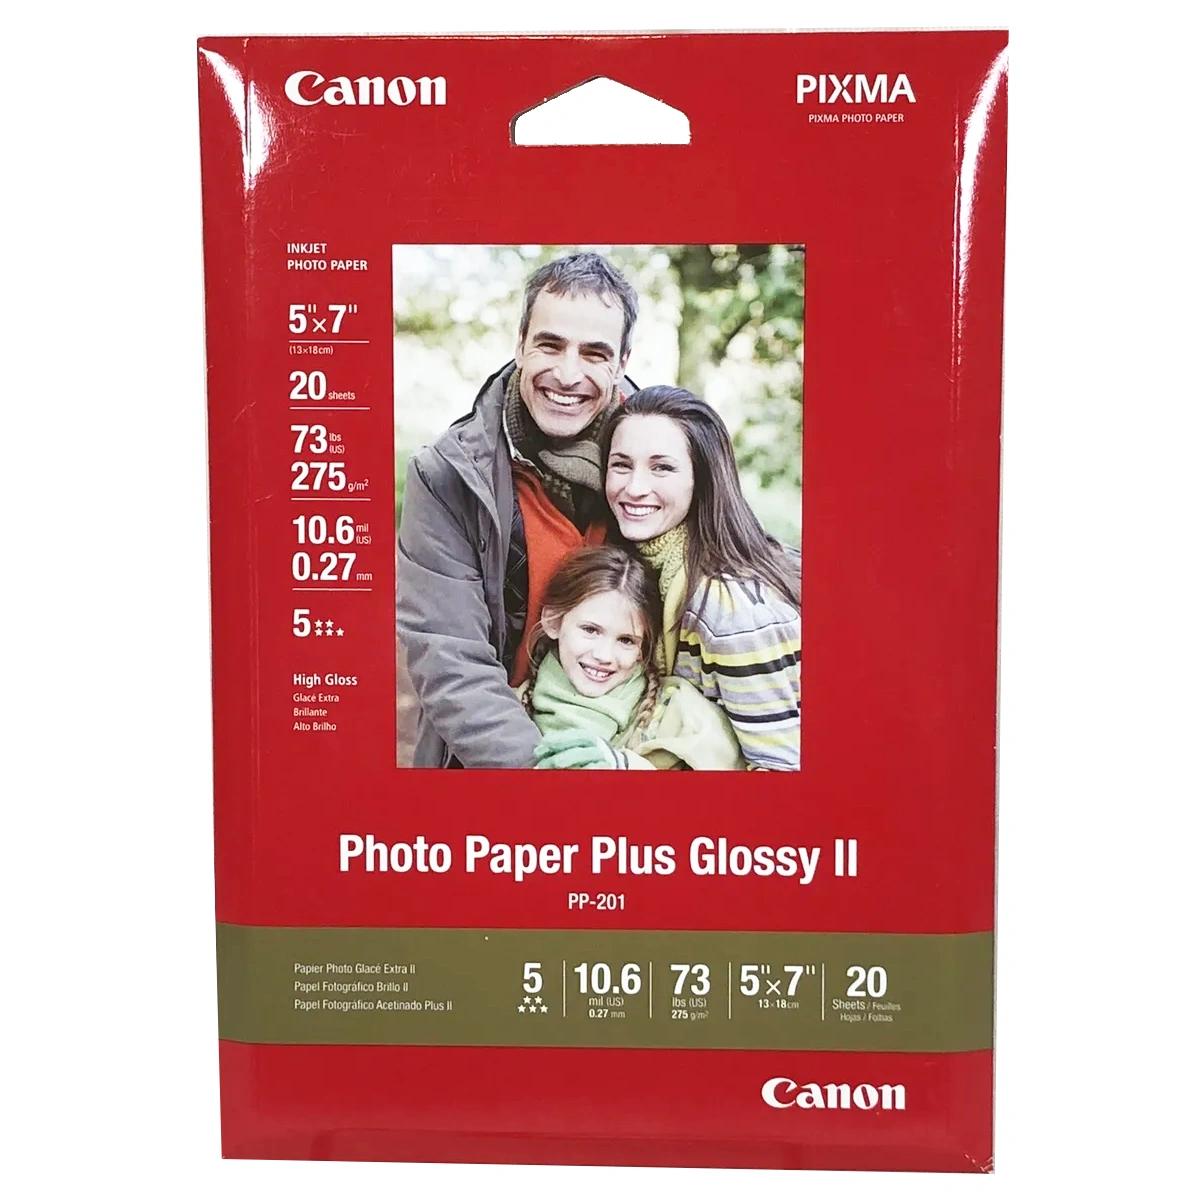 Canon Photo Paper Plus Glossy II Package 5x7" New